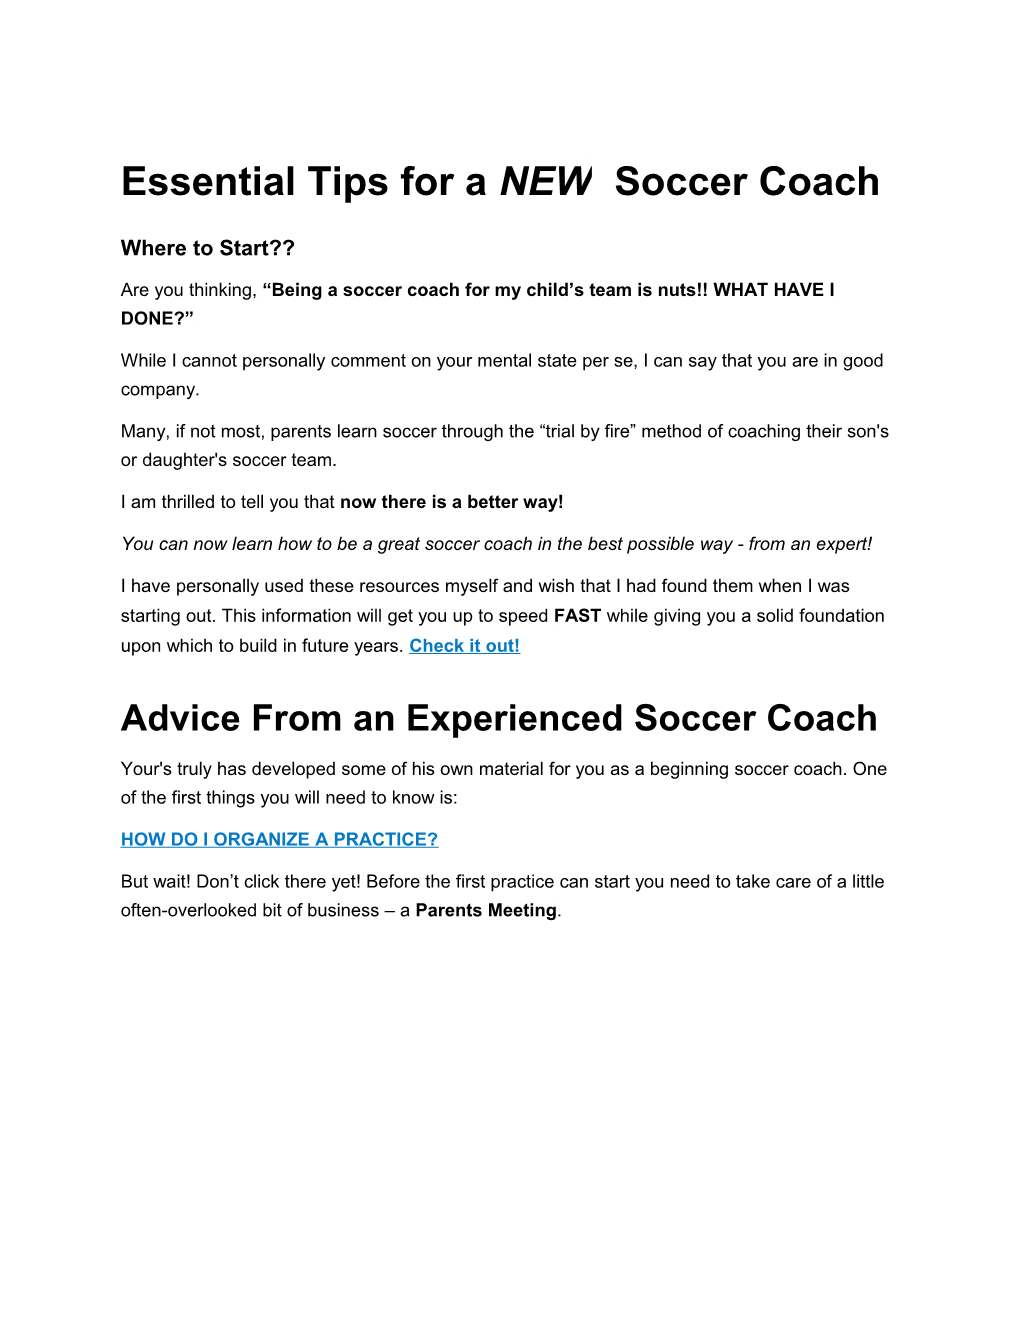 Tips for a New Soccer Coach